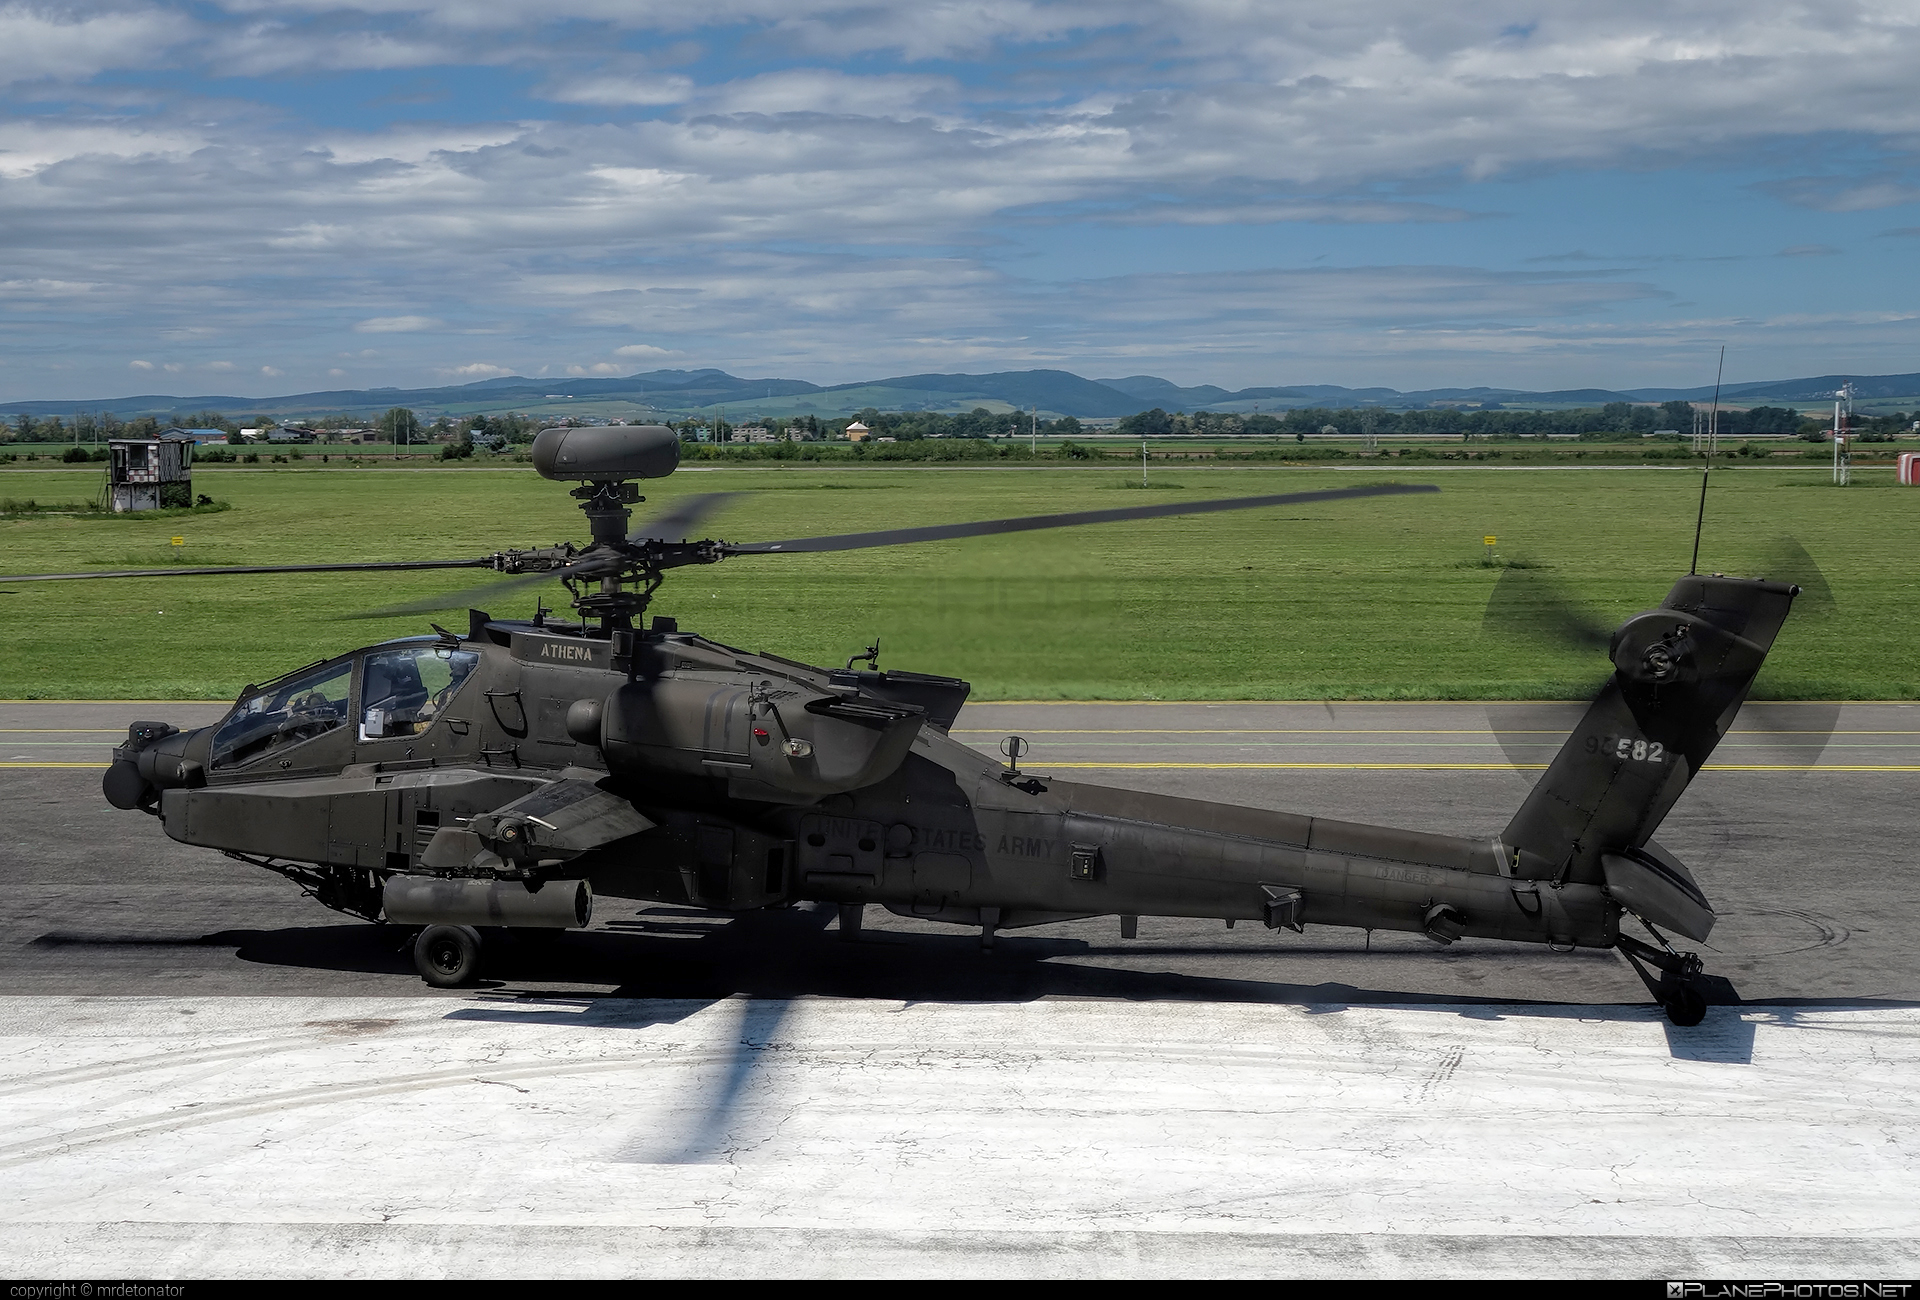 Boeing AH-64D Apache Longbow - 09-05582 operated by US Army #boeing #usarmy